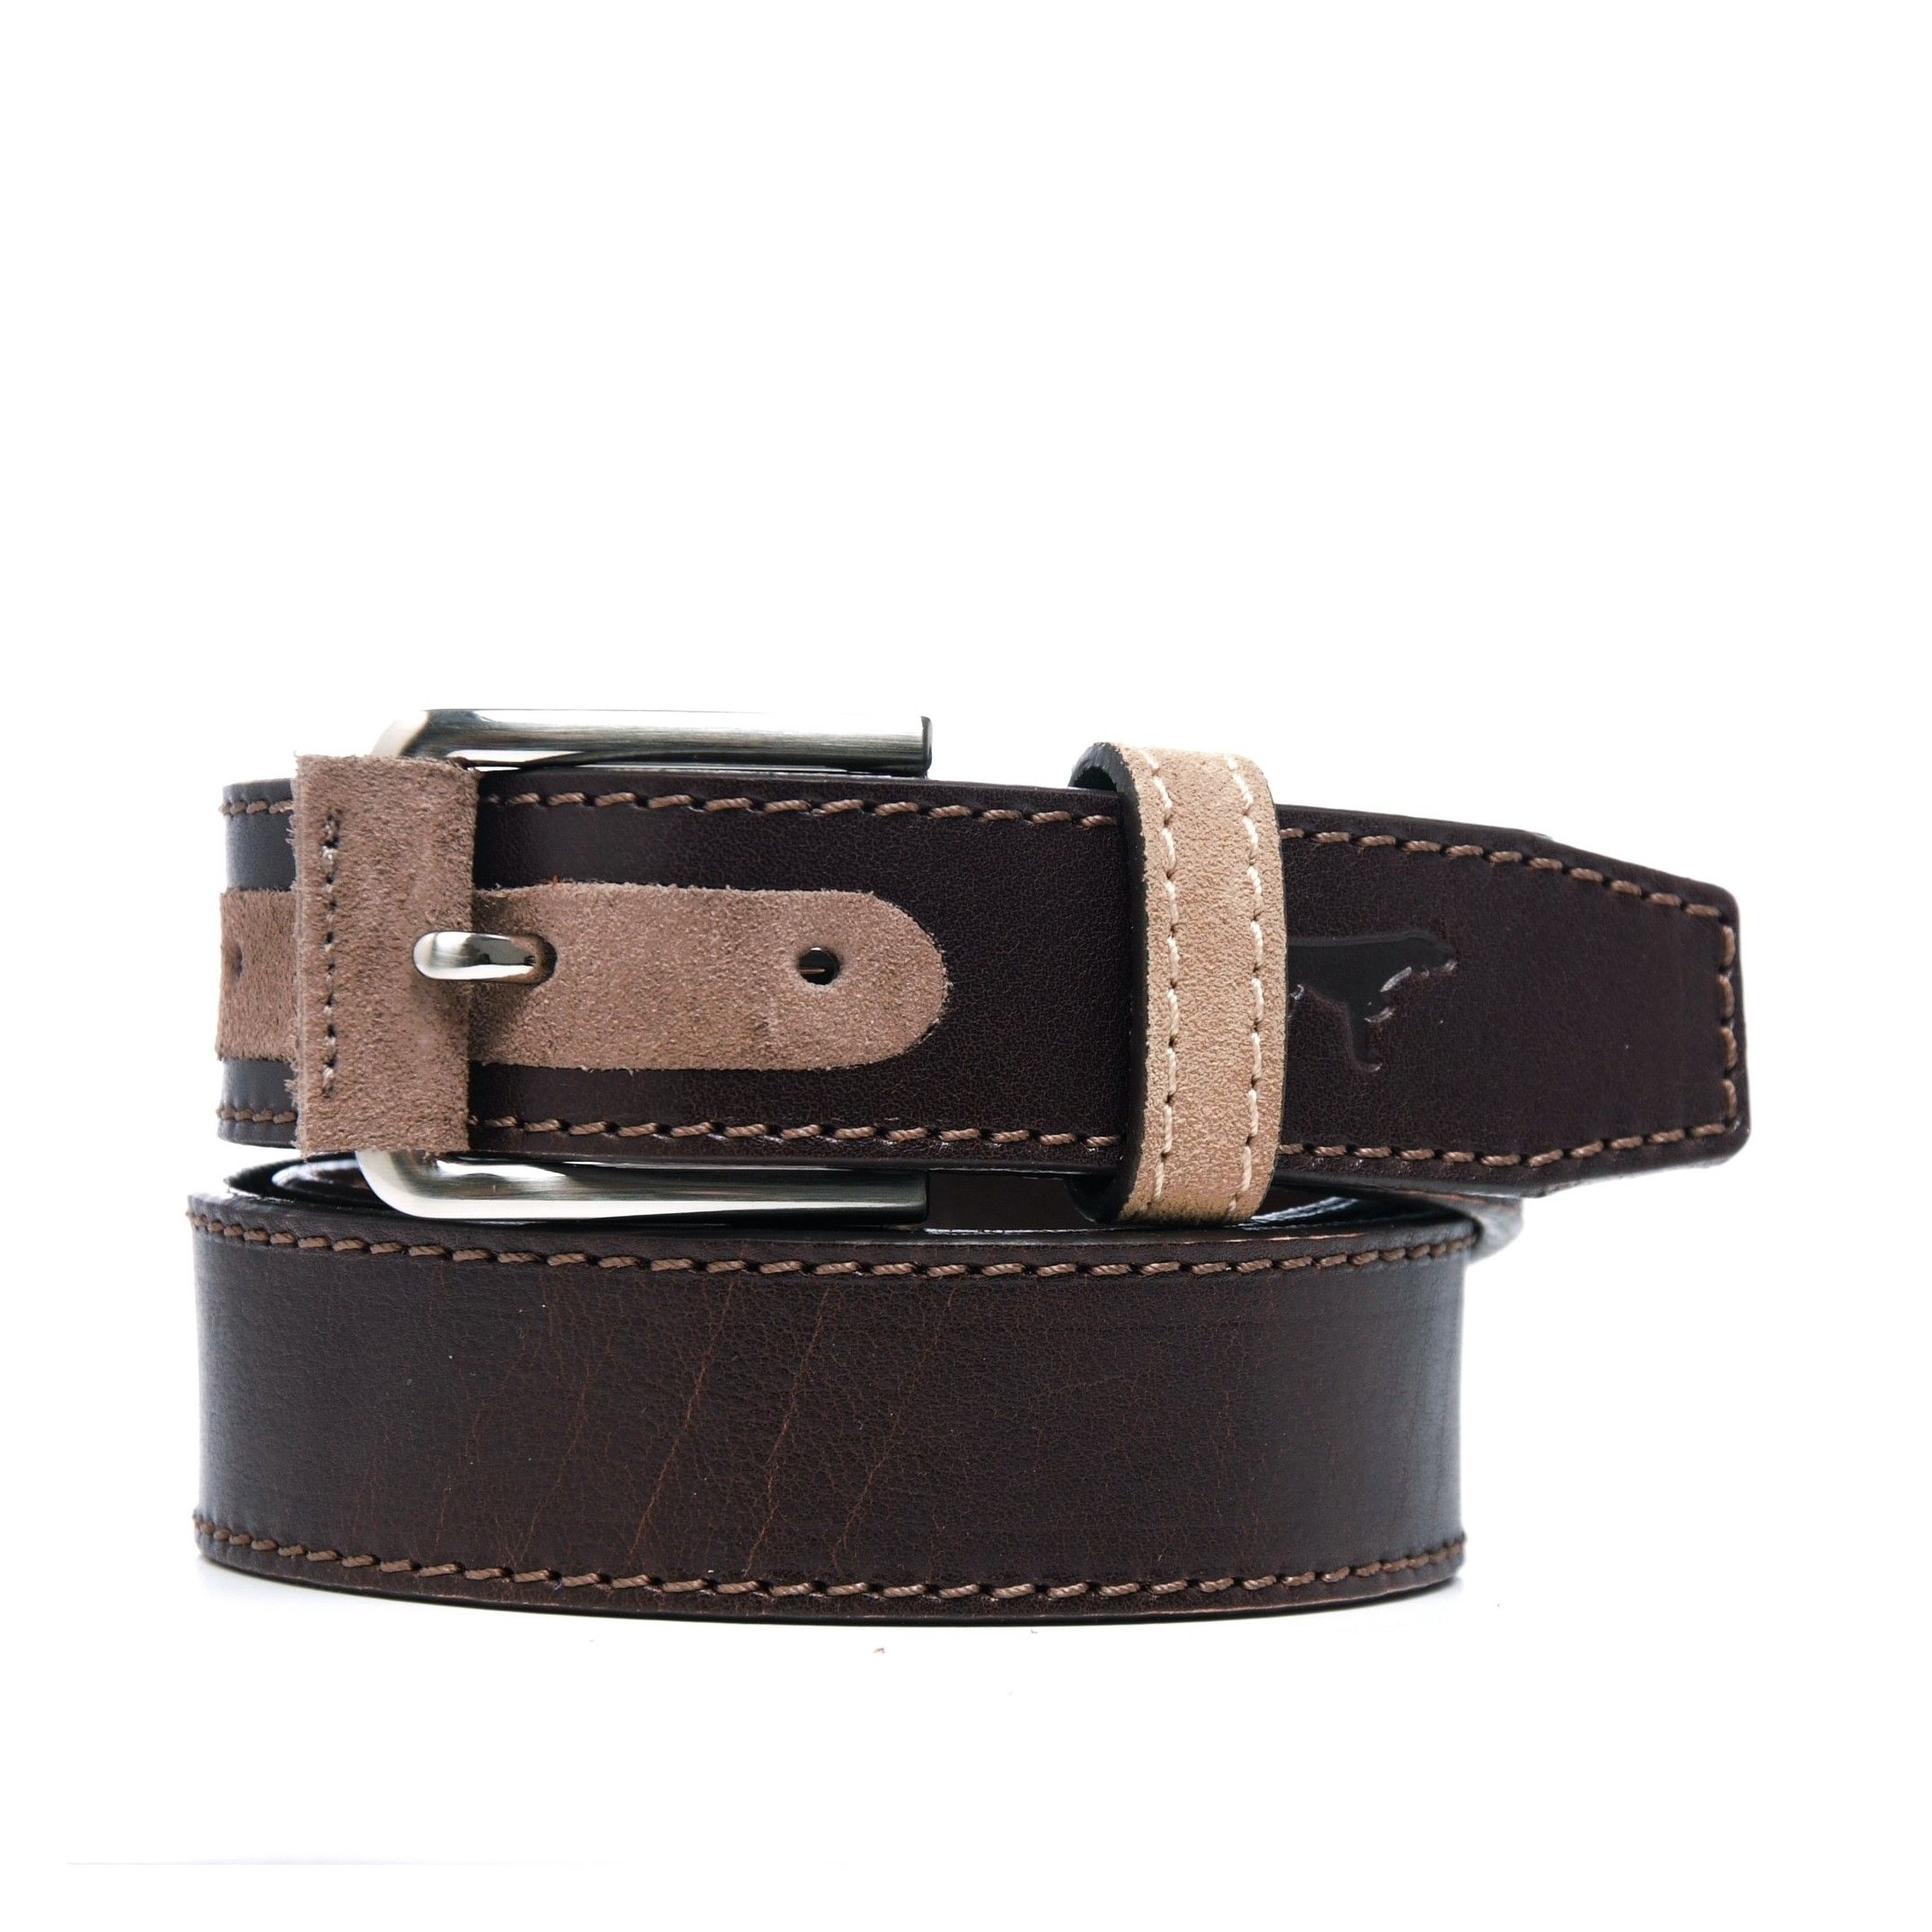 Castellanisimos men's leather belt with detail in the hole . Metal buckle. Width: 3,5cm. MADE IN SPAIN.